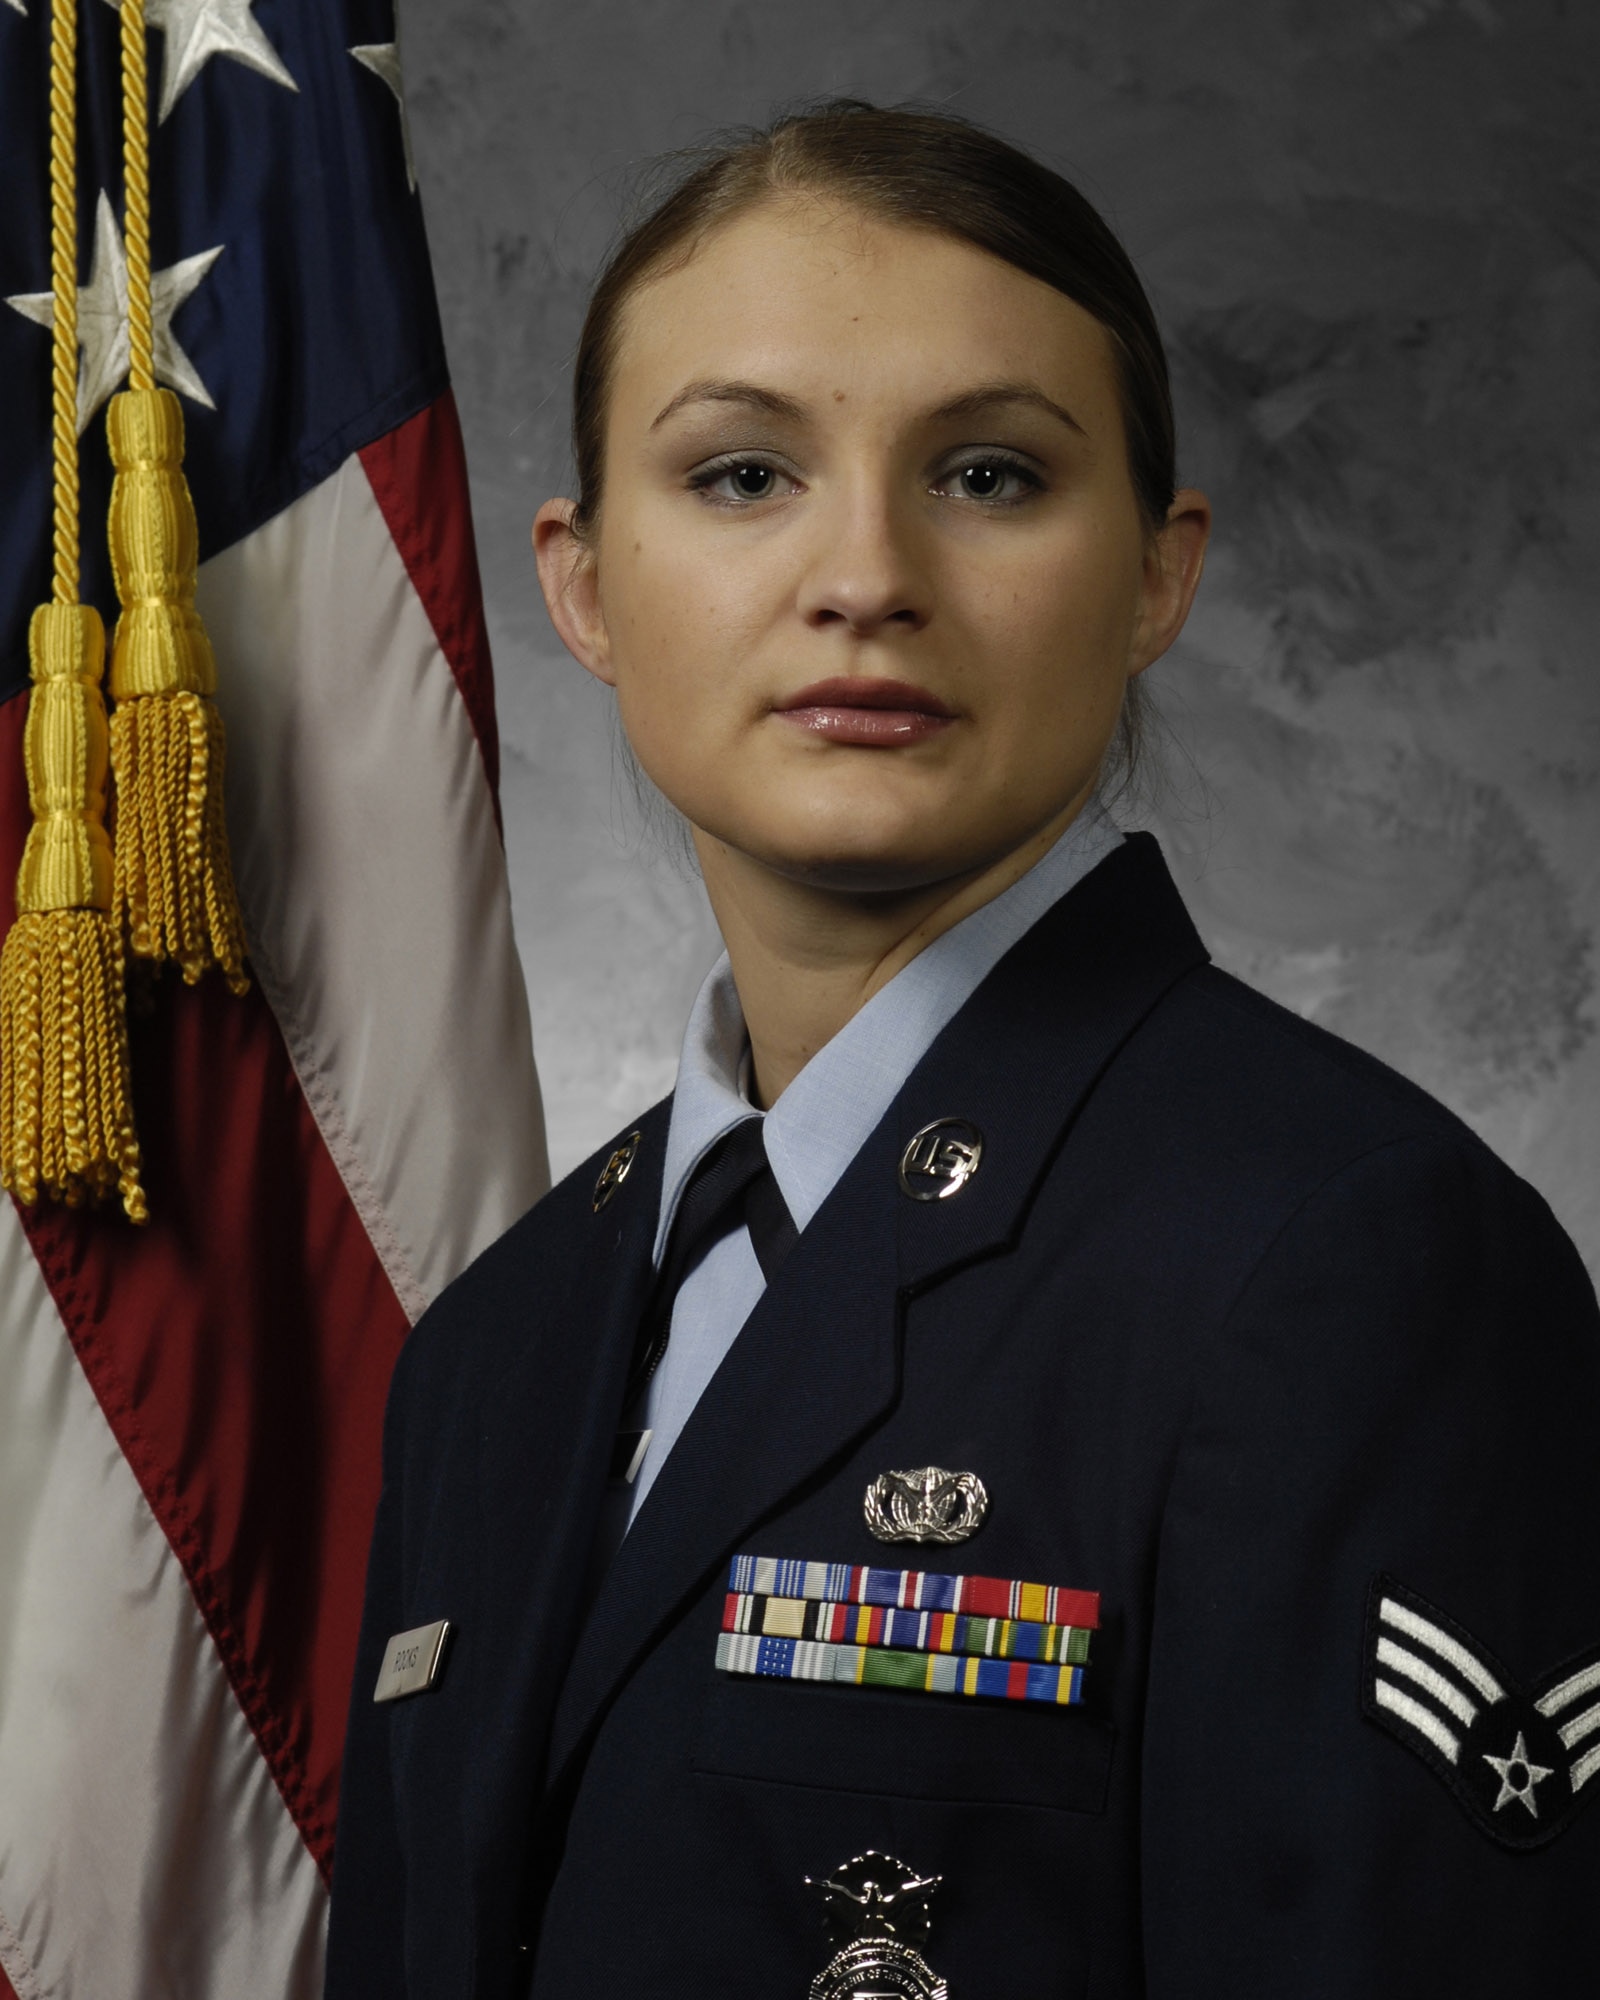 Senior Airman Whitney S. Rooks is an installation patrolman with the 11th Security Forces Squadron. She deployed in support of Operation Iraqi Freedom, where she safeguarded more than $3 billion in assets. She provided command and control for 11 patrols and secured more than 240 aircraft on Department of Defense’s busiest runway. She maintained security in the face of more than 125 rocket and mortar attacks, protecting coalition forces with zero casualties. Airman Rooks is pursuing her associate’s degree and completed six credit hours while deployed. She also volunteered 20 hours at the medical care unit supporting Iraqi children during her deployment. (U.S. Air Force photo by Senior Airman Sean Adams)